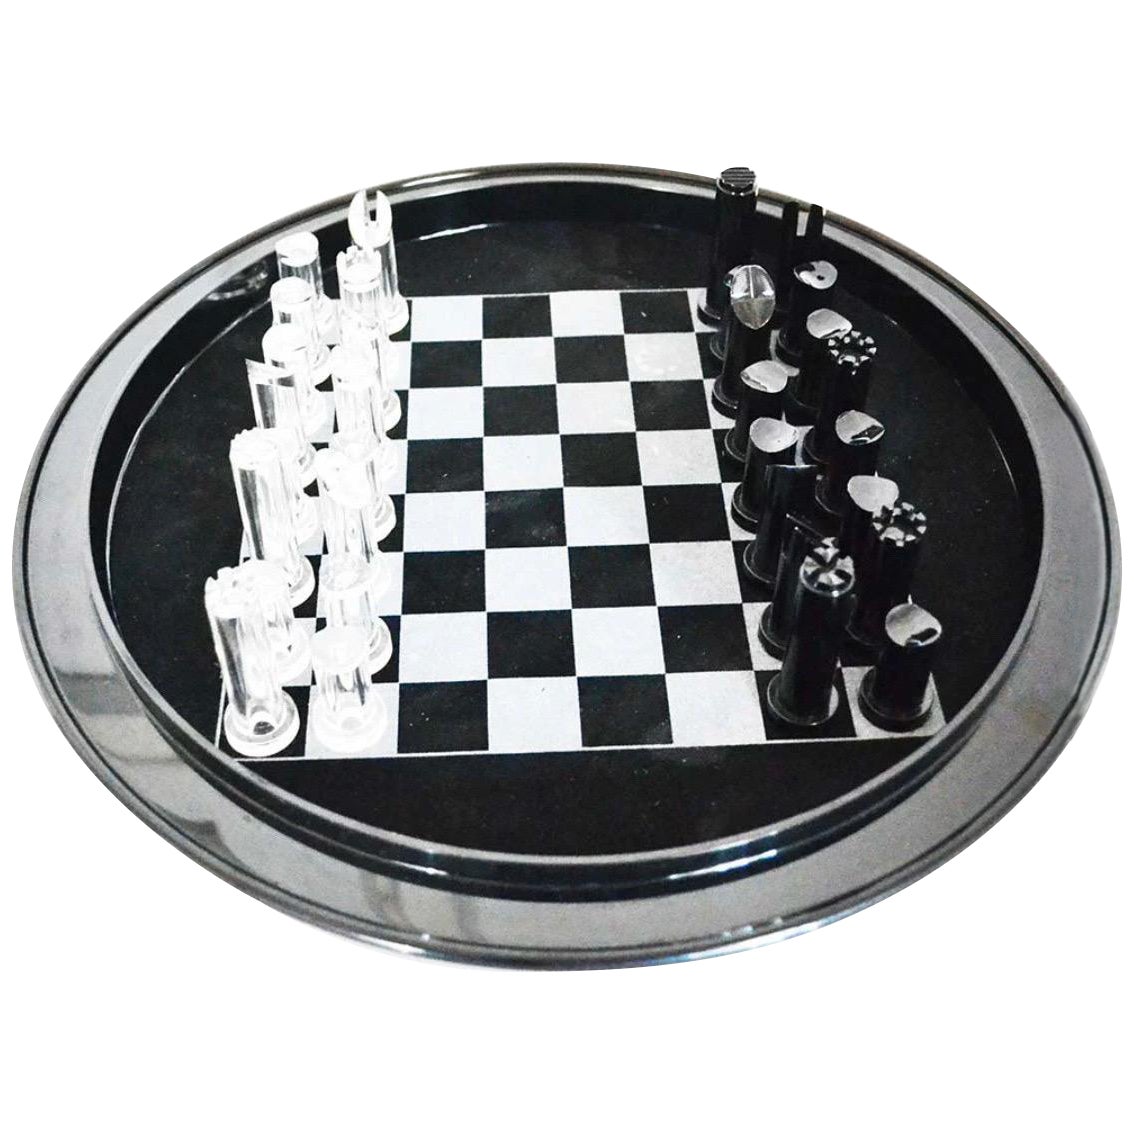 Game of Checkers produced by Rede Guzzini for Krizia, Design For Sale